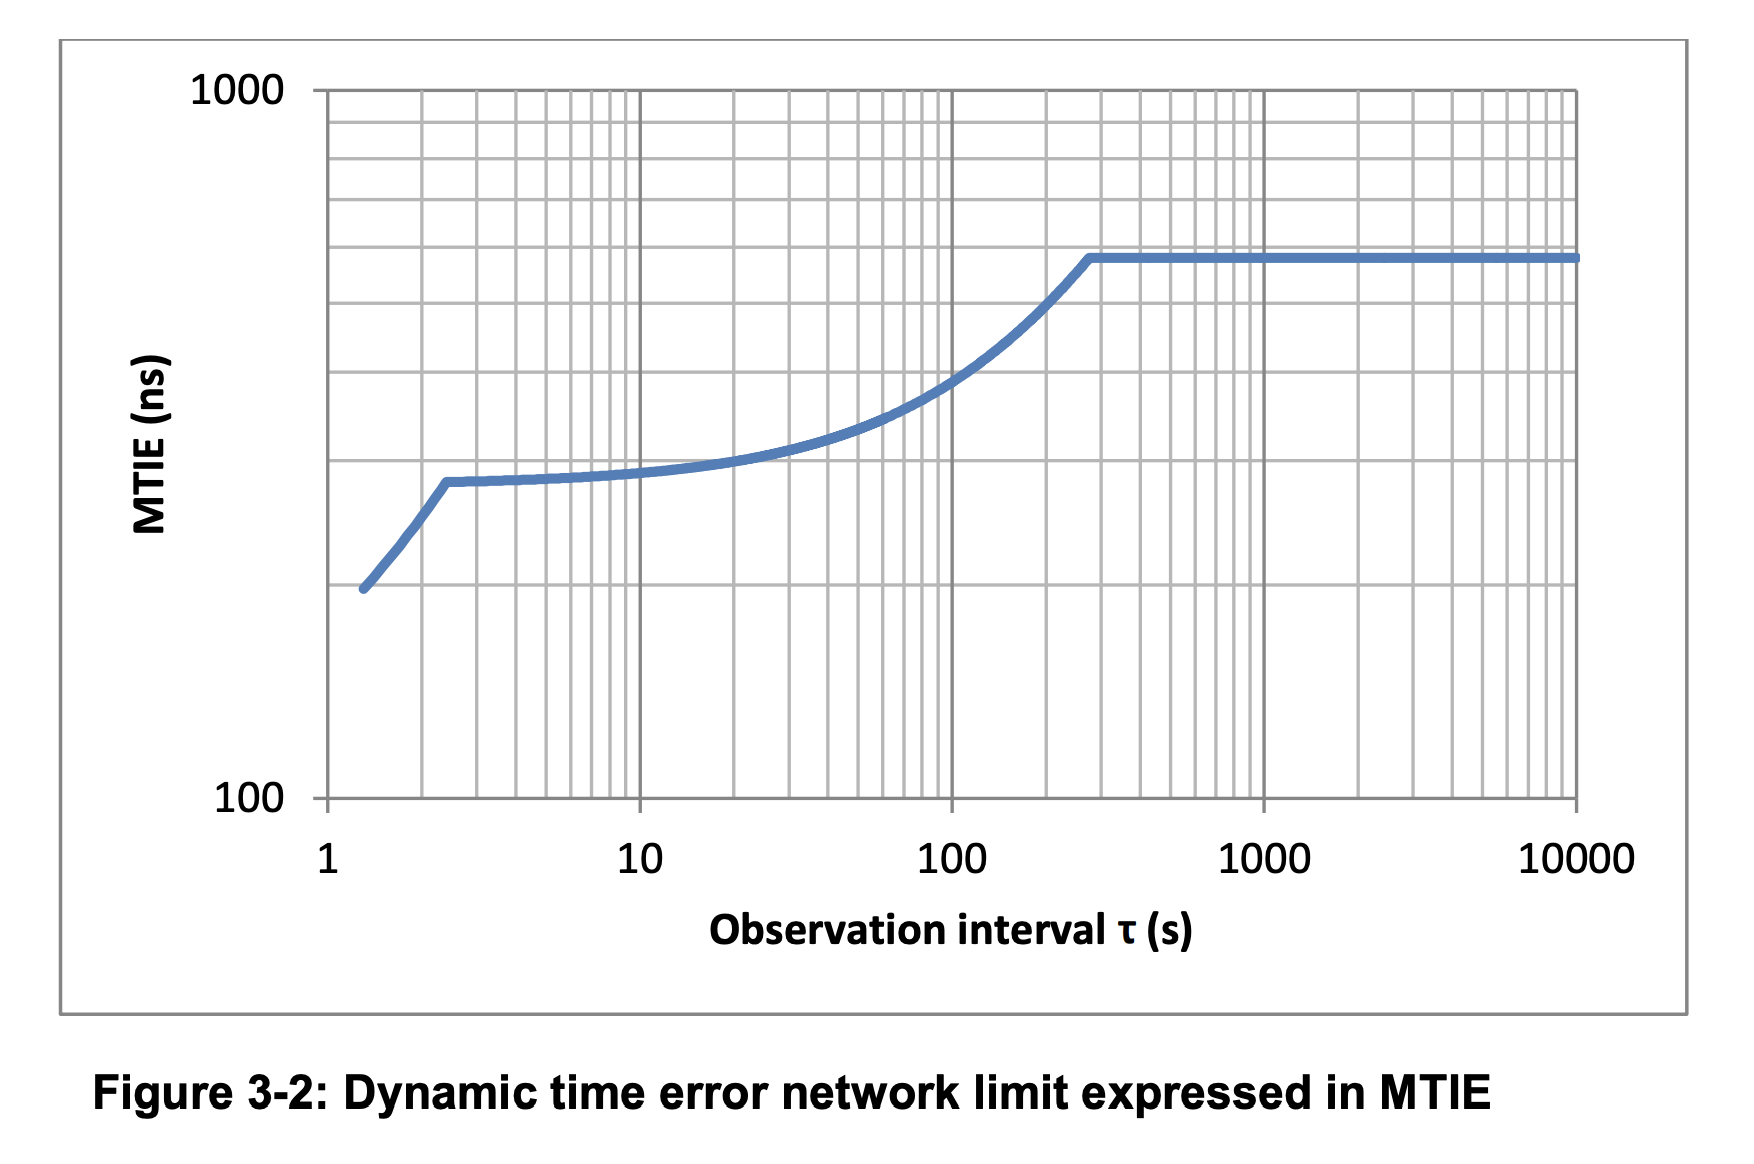 Figure 3-2 Dynamic time error network limit expressed in MTIE